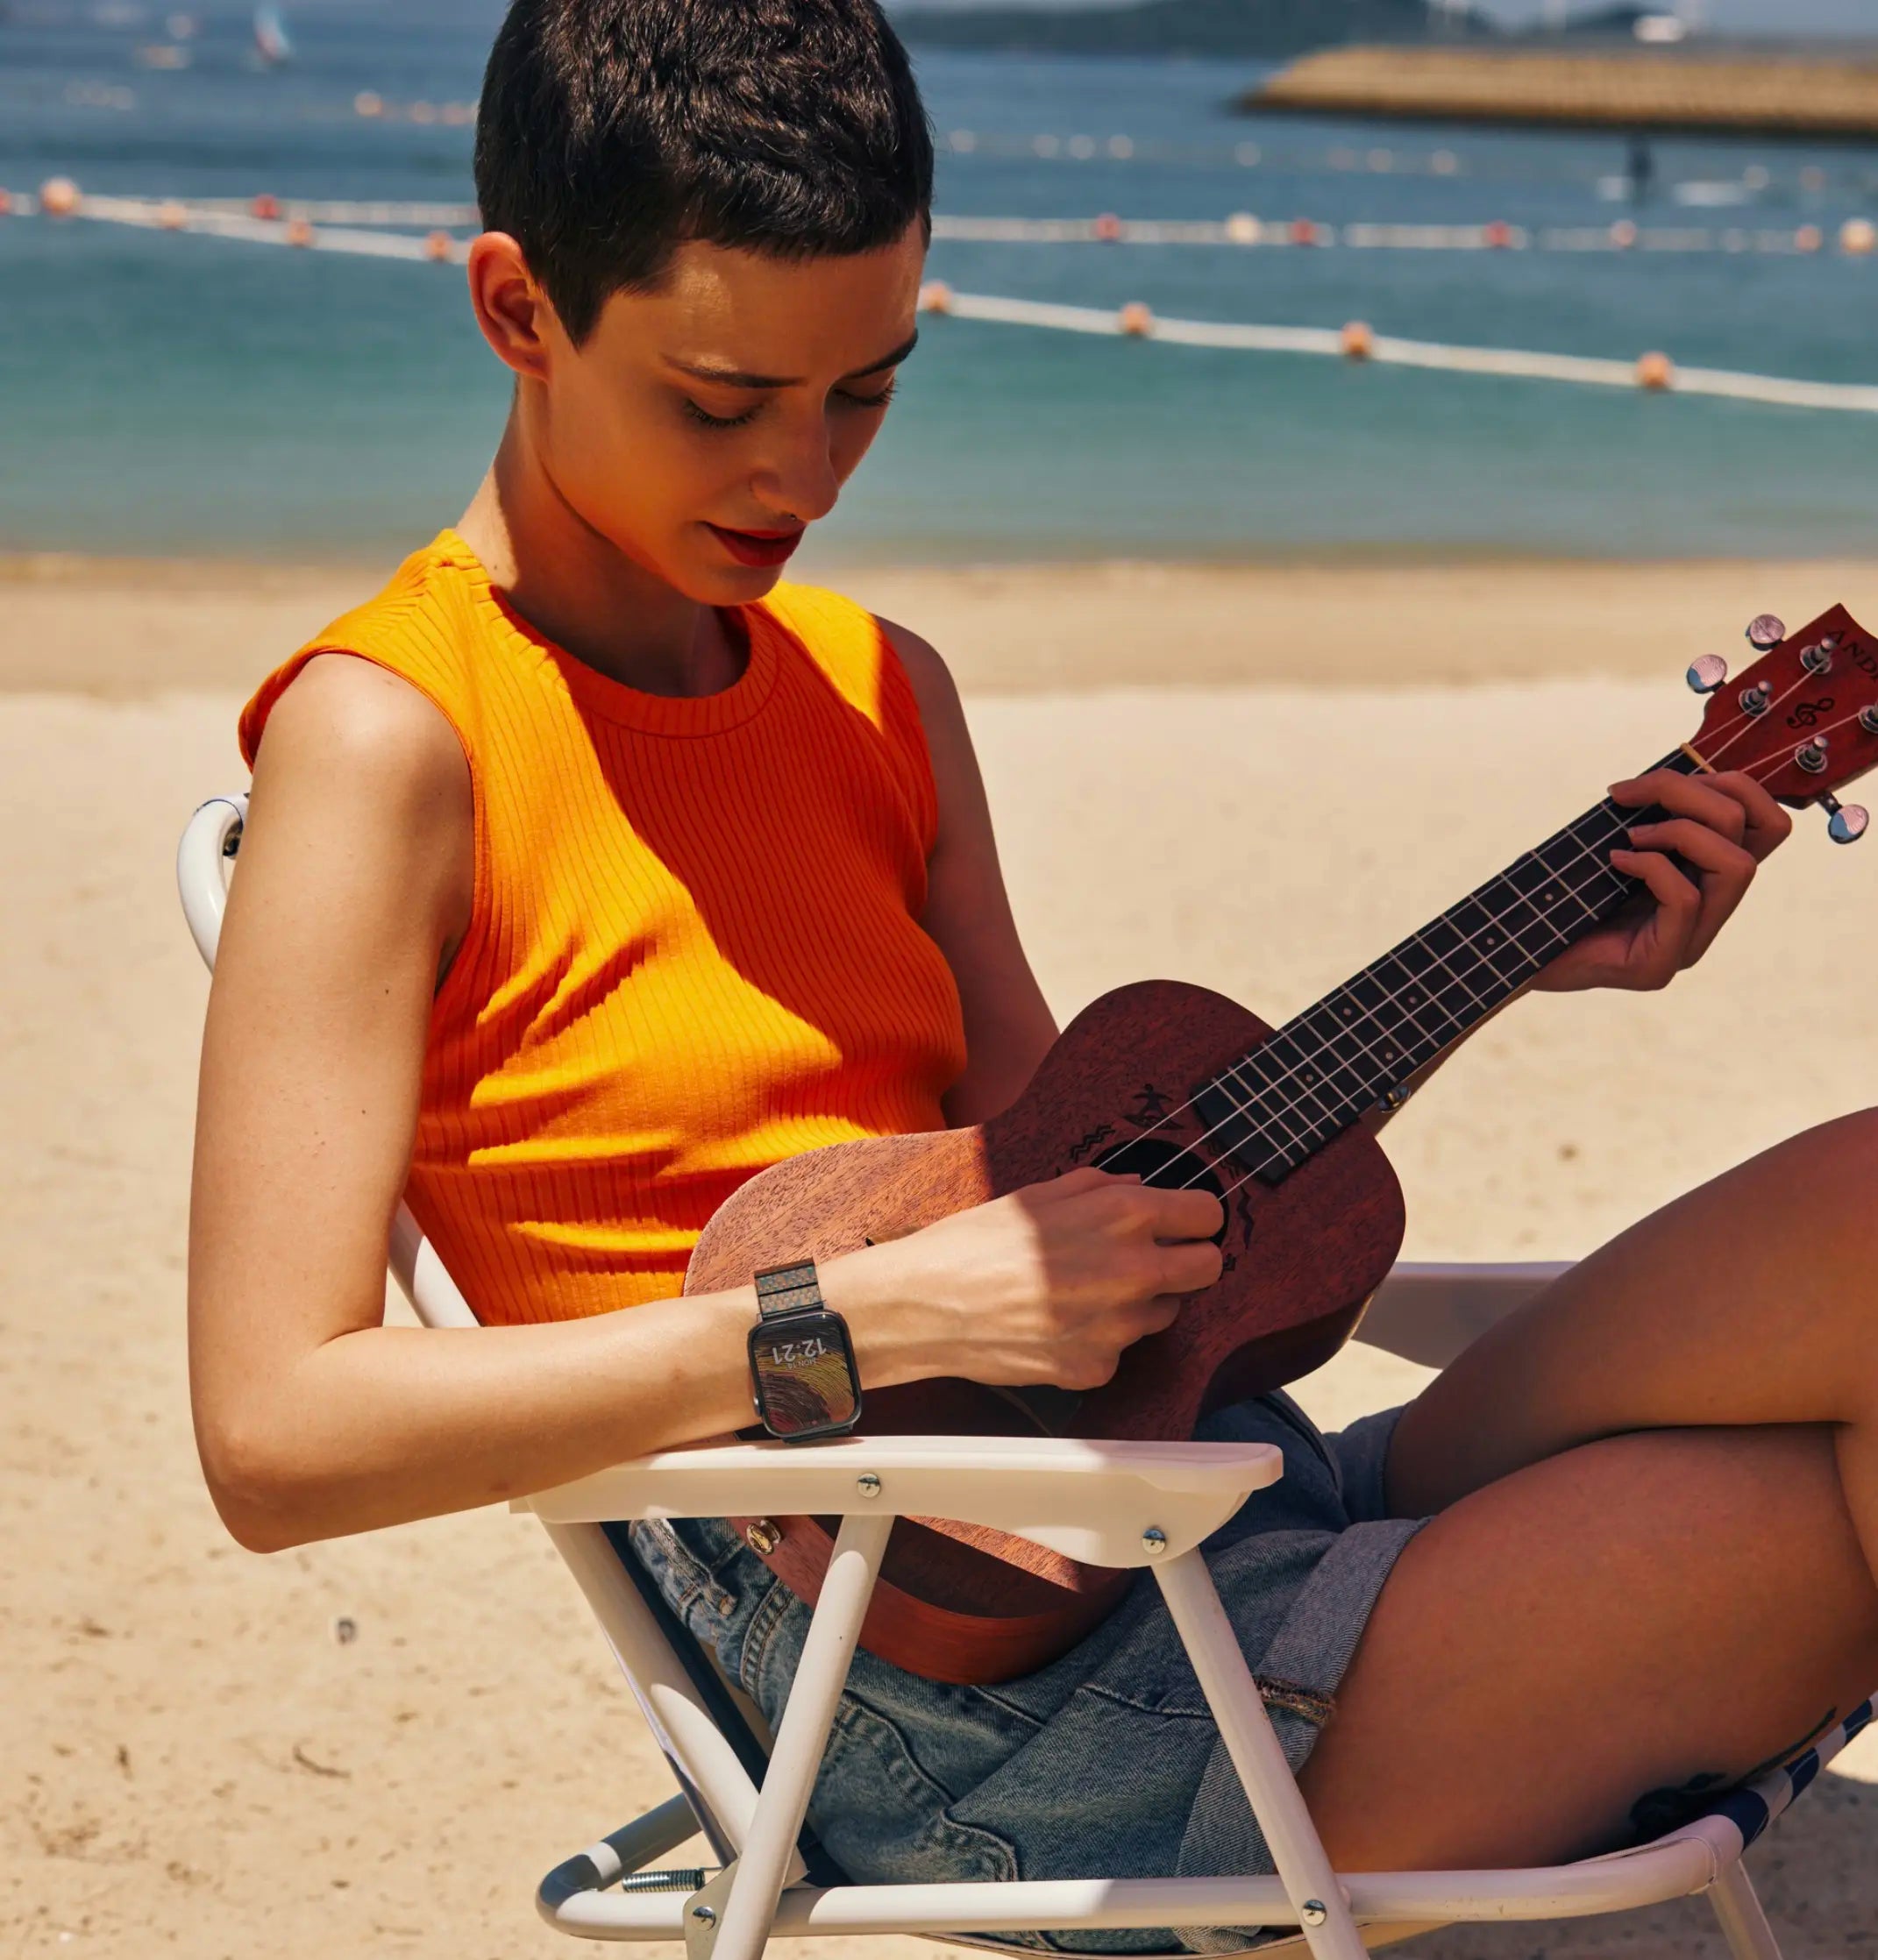 A girl sitting on a beach playing a musical instrument with PITAKA Apple watch band on her wrist